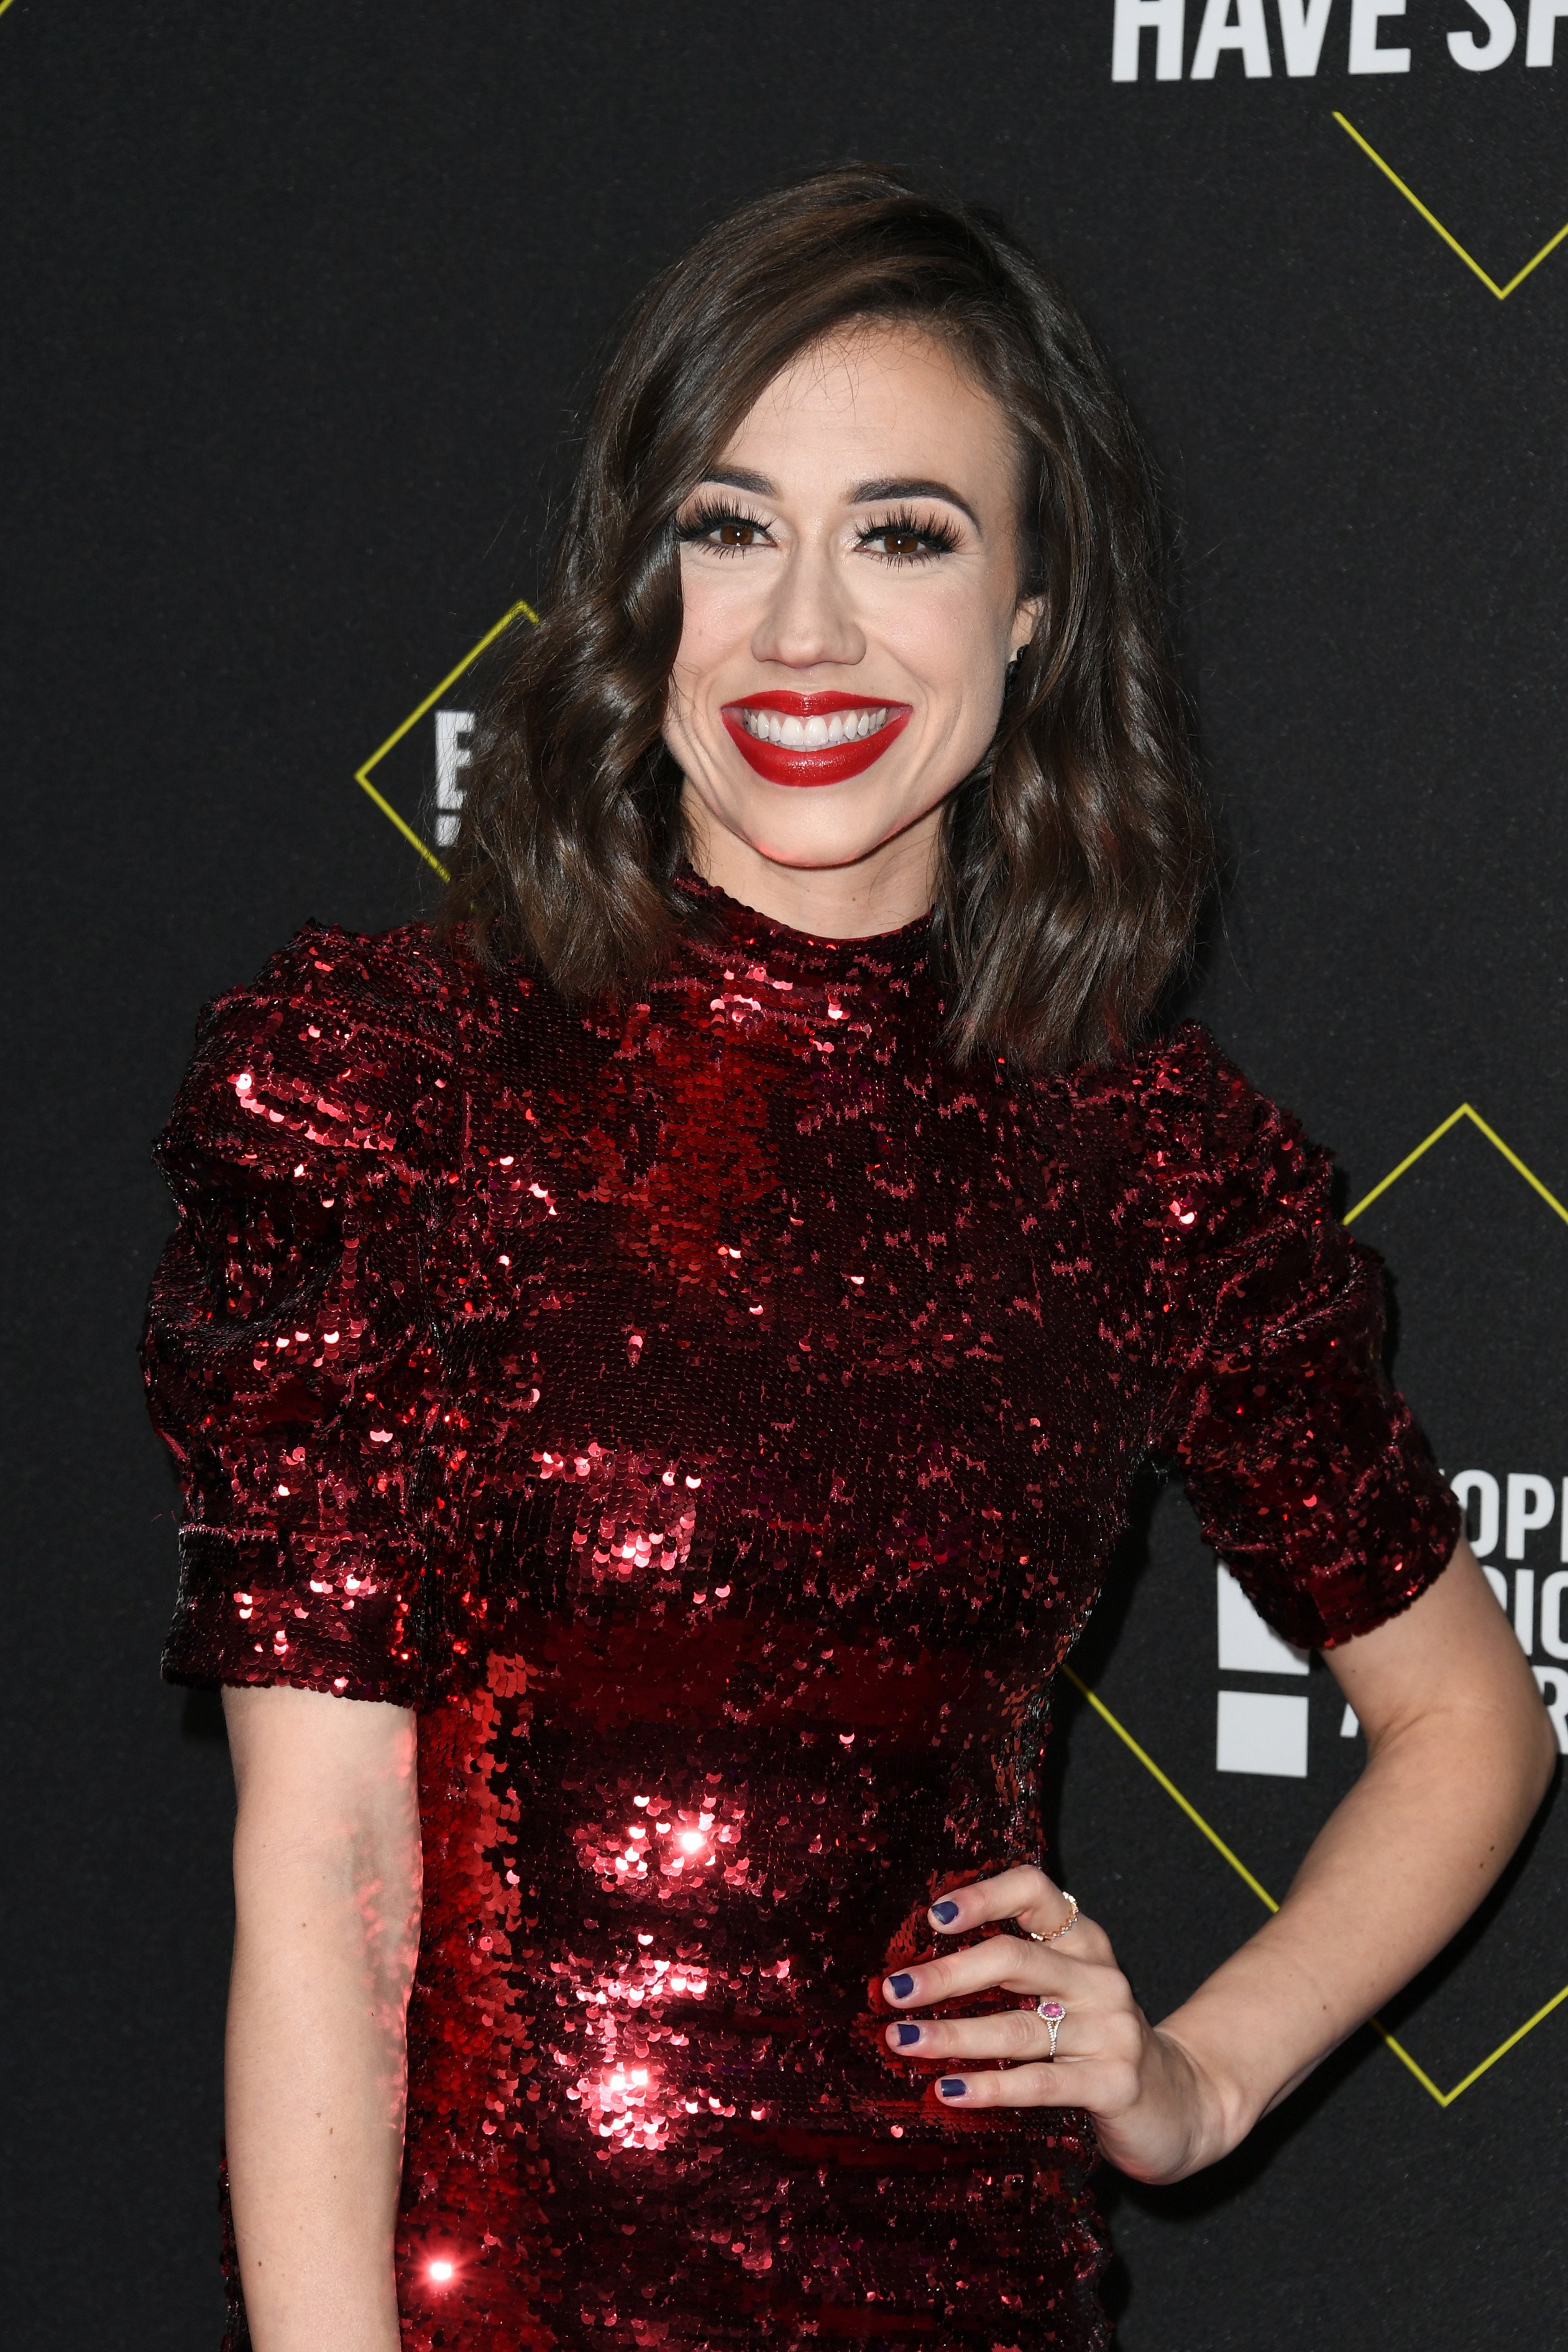 Colleen Ballinger attends the 2019 E! People's Choice Awards at Barker Hangar on November 10, 2019, in Santa Monica, California. | Source: Getty Images